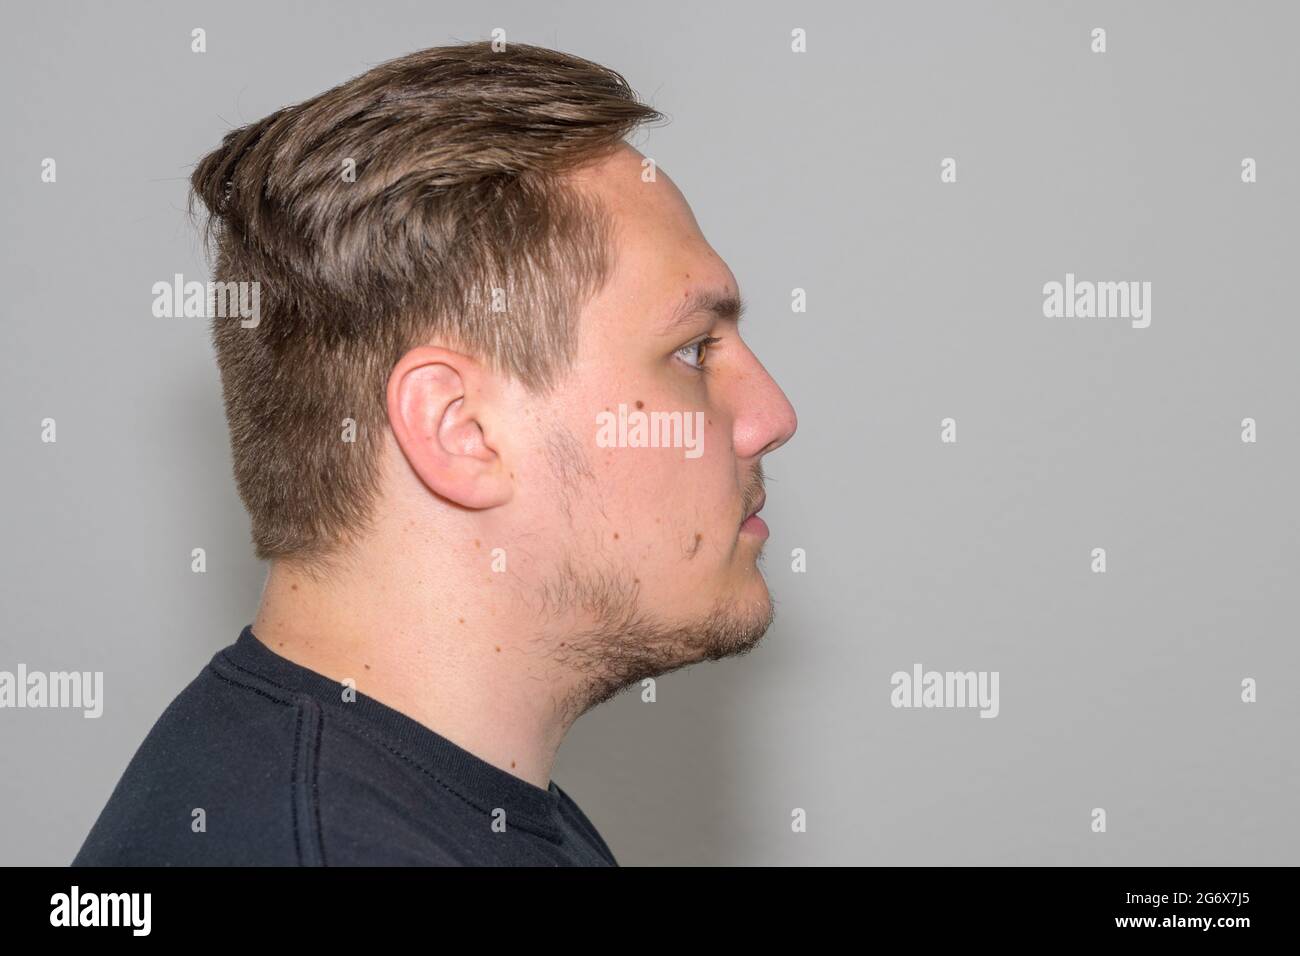 Profile view of a young man in his twenties, looking to the right Stock Photo